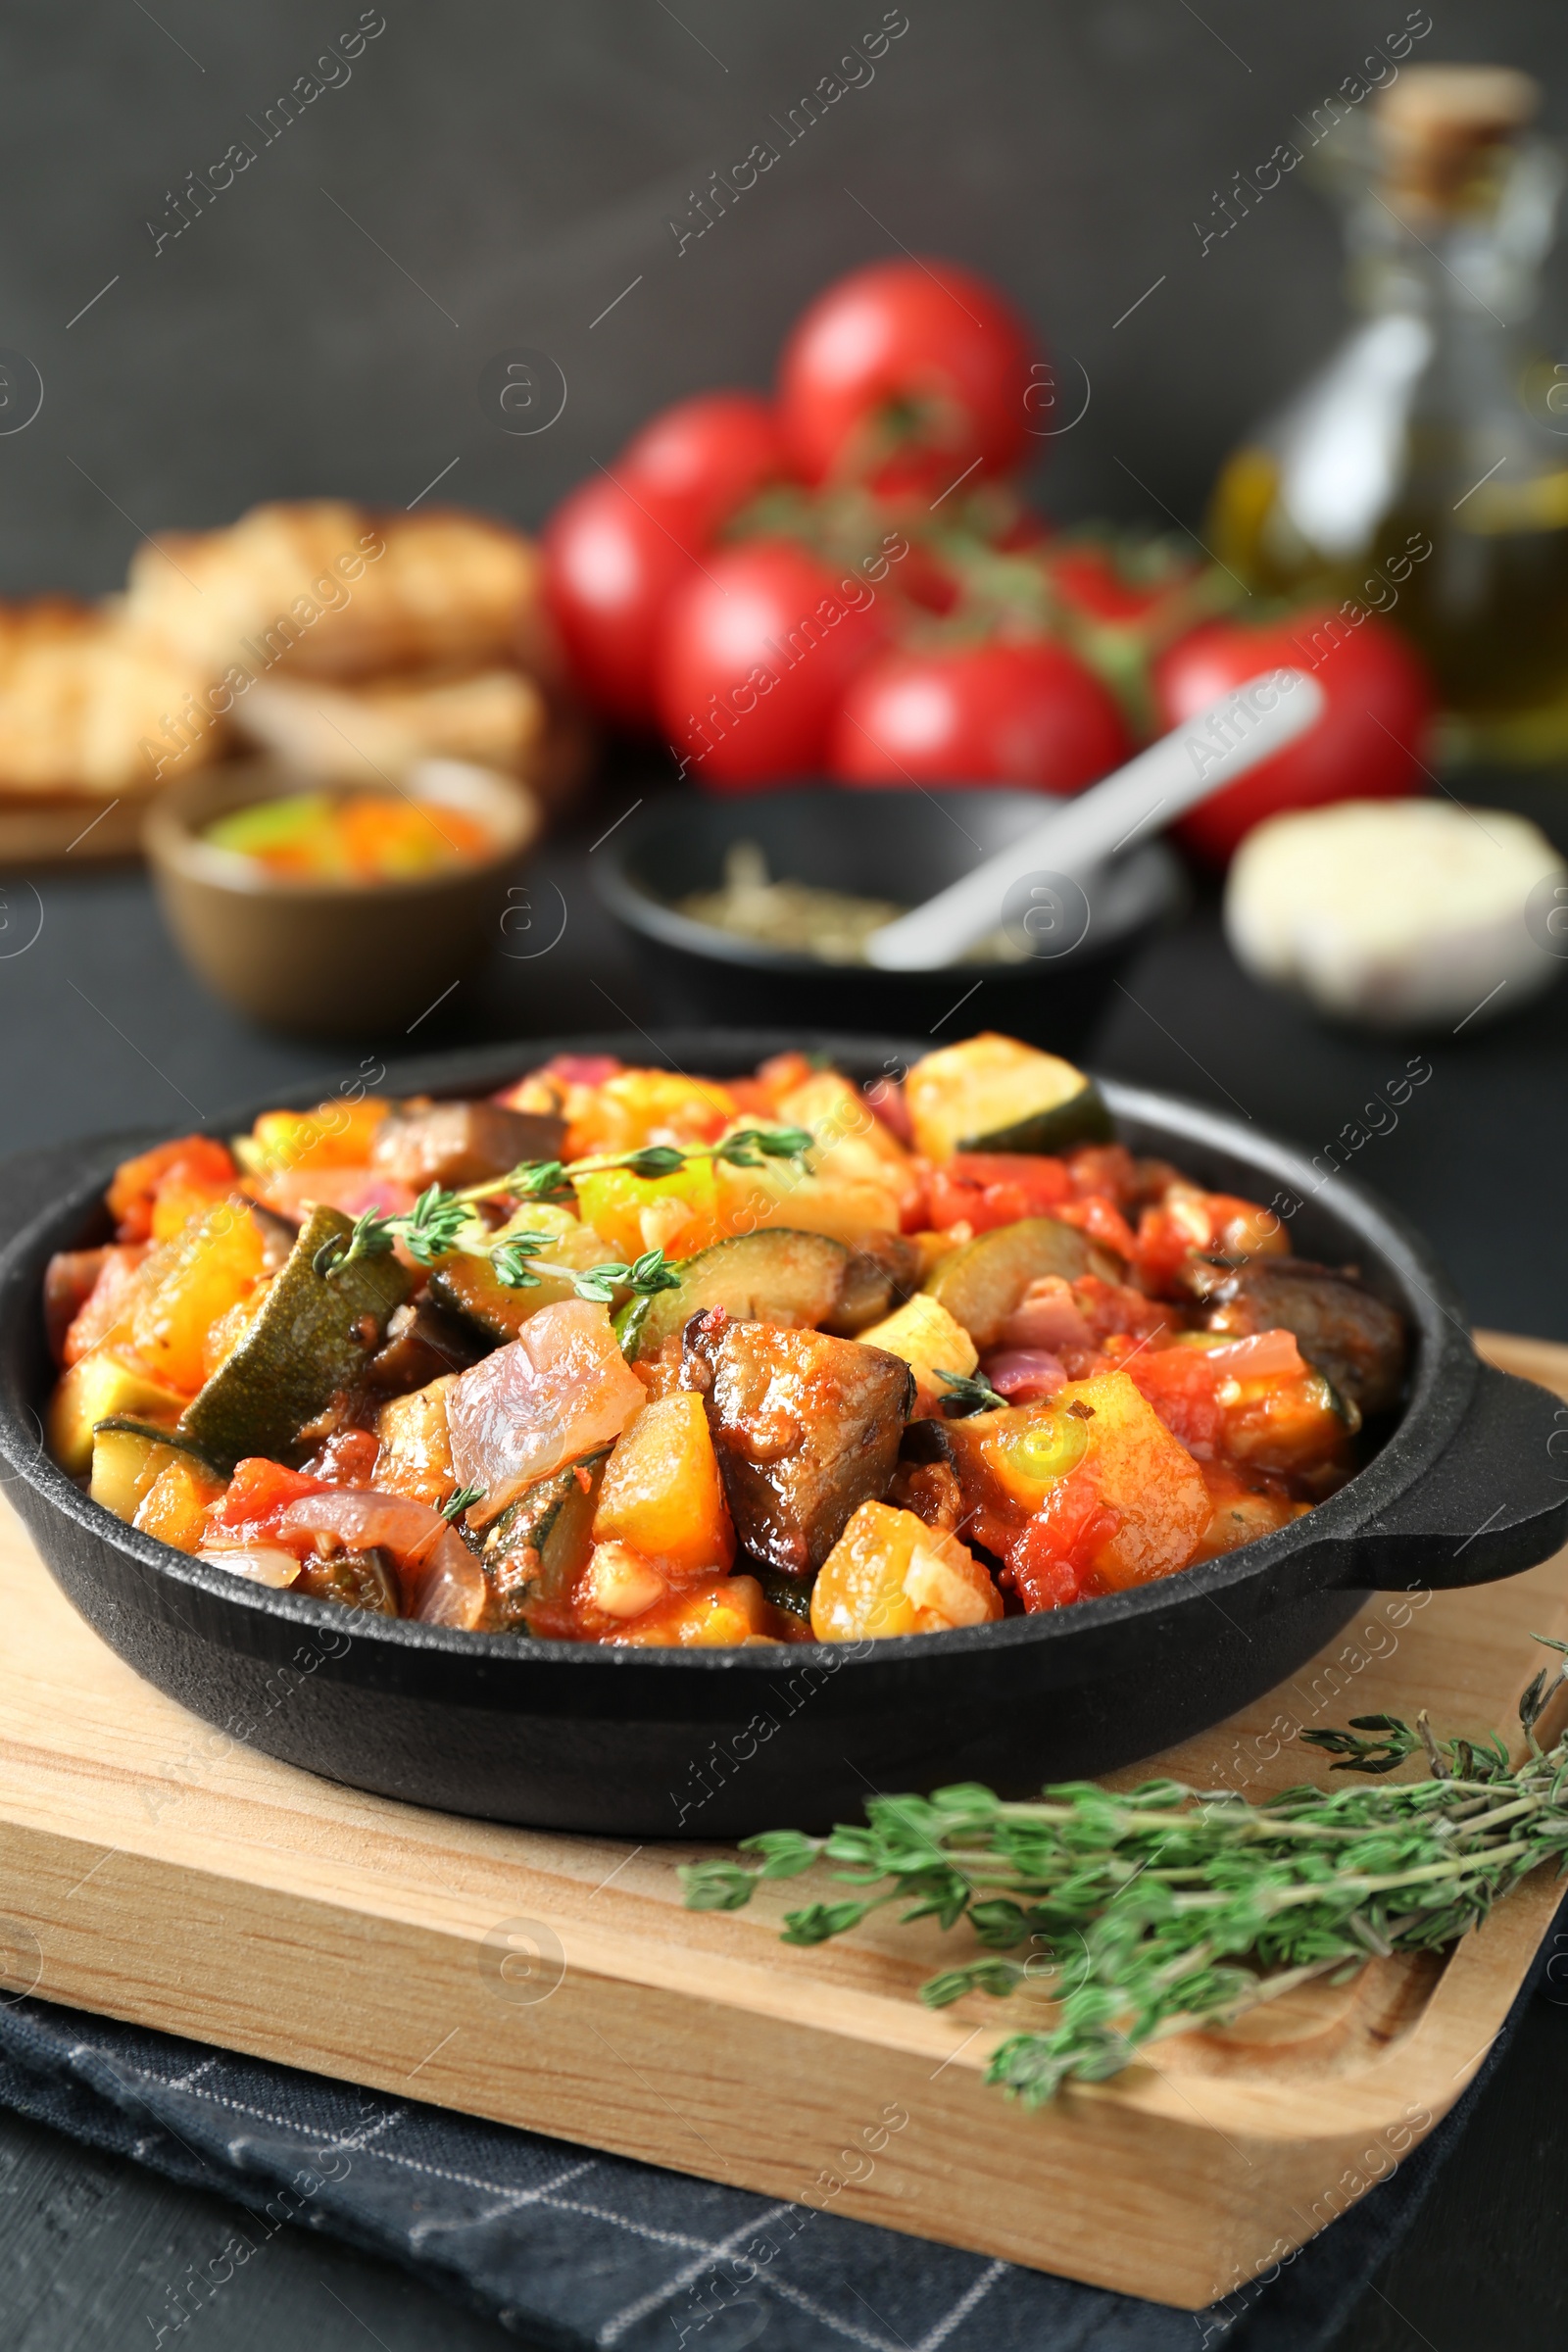 Photo of Dish with tasty ratatouille on wooden board